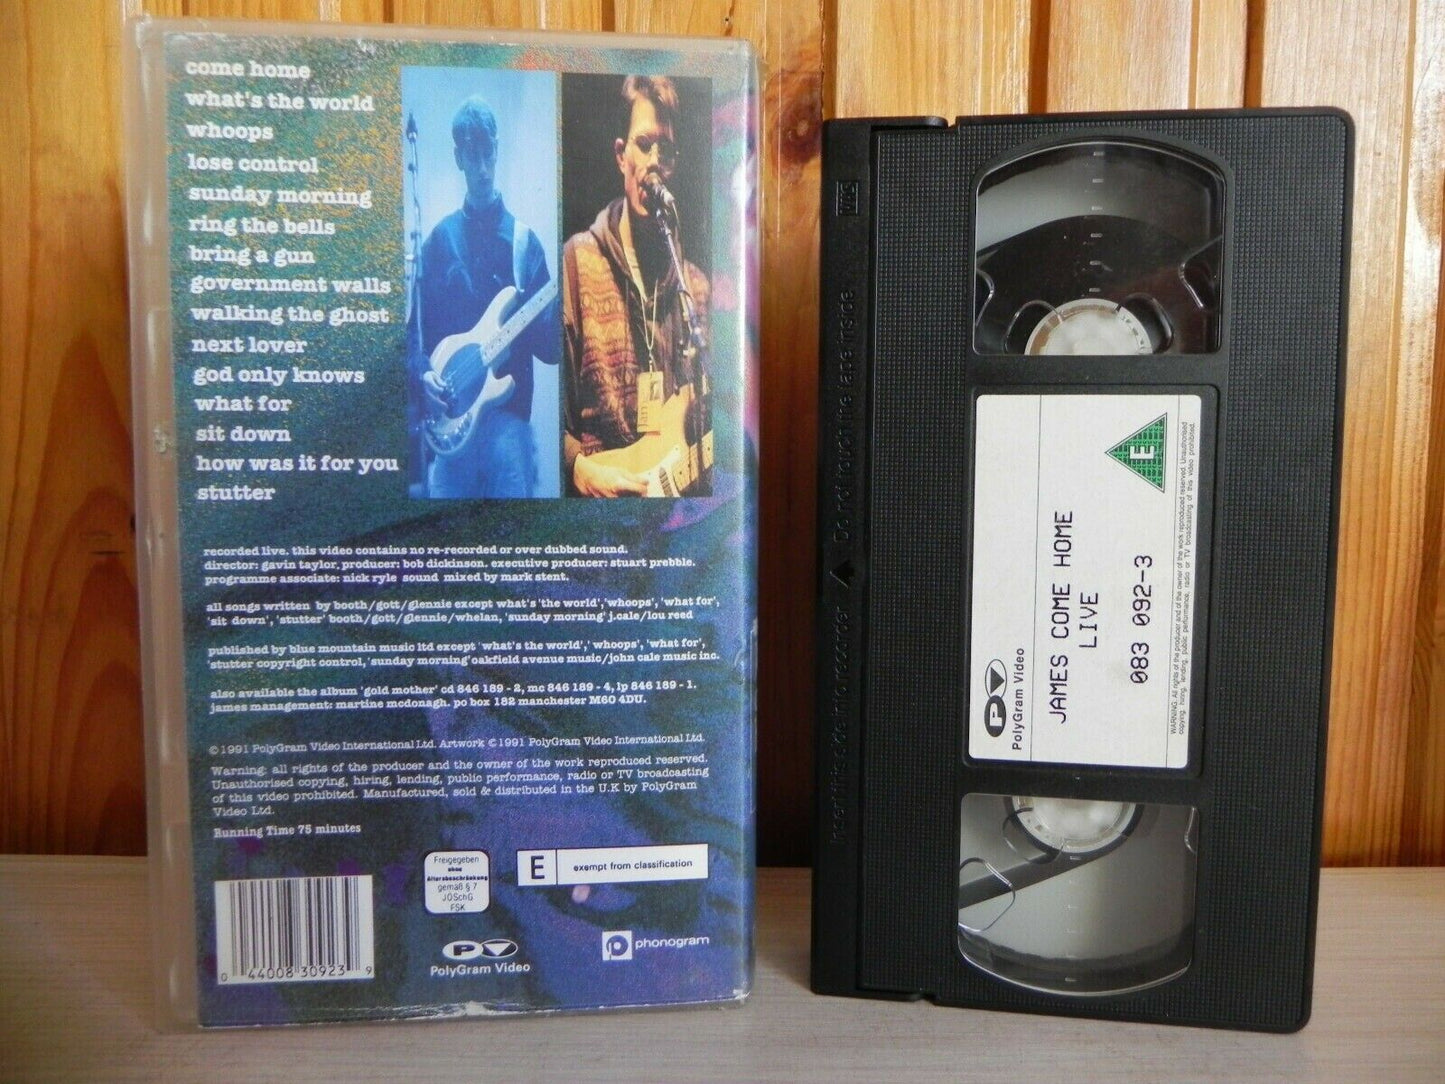 James Come Home - Live - Recorded Live - 1991 PolyGram Video - Music - Pal VHS-